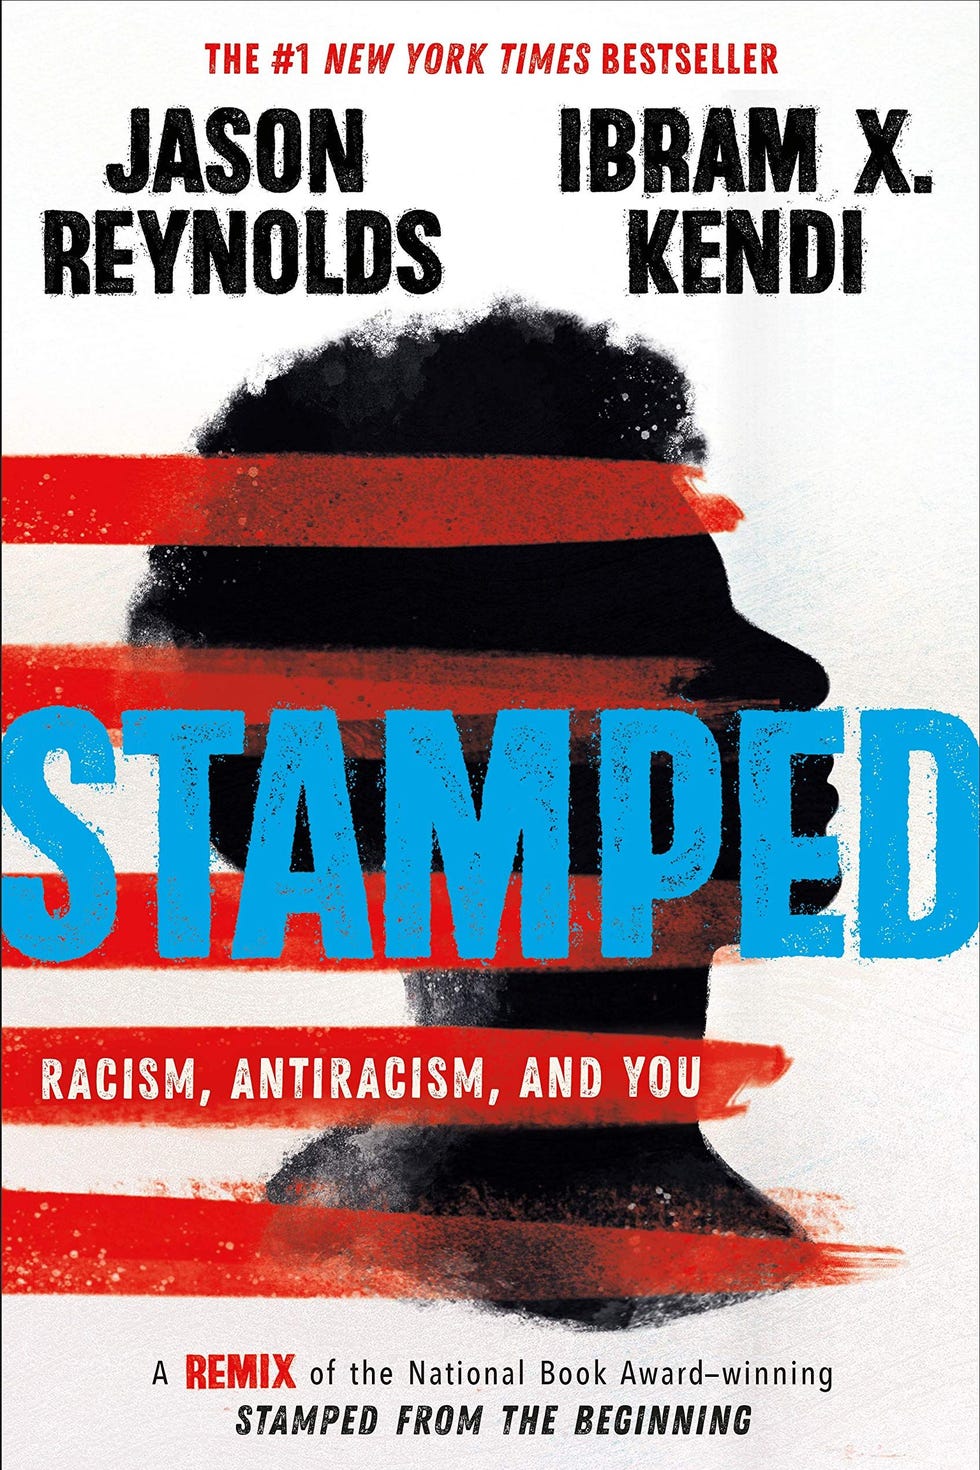 ‘Stamped: Racism, Anti Racism, and You’ by Jason Reynolds and Ibram X. Kendi